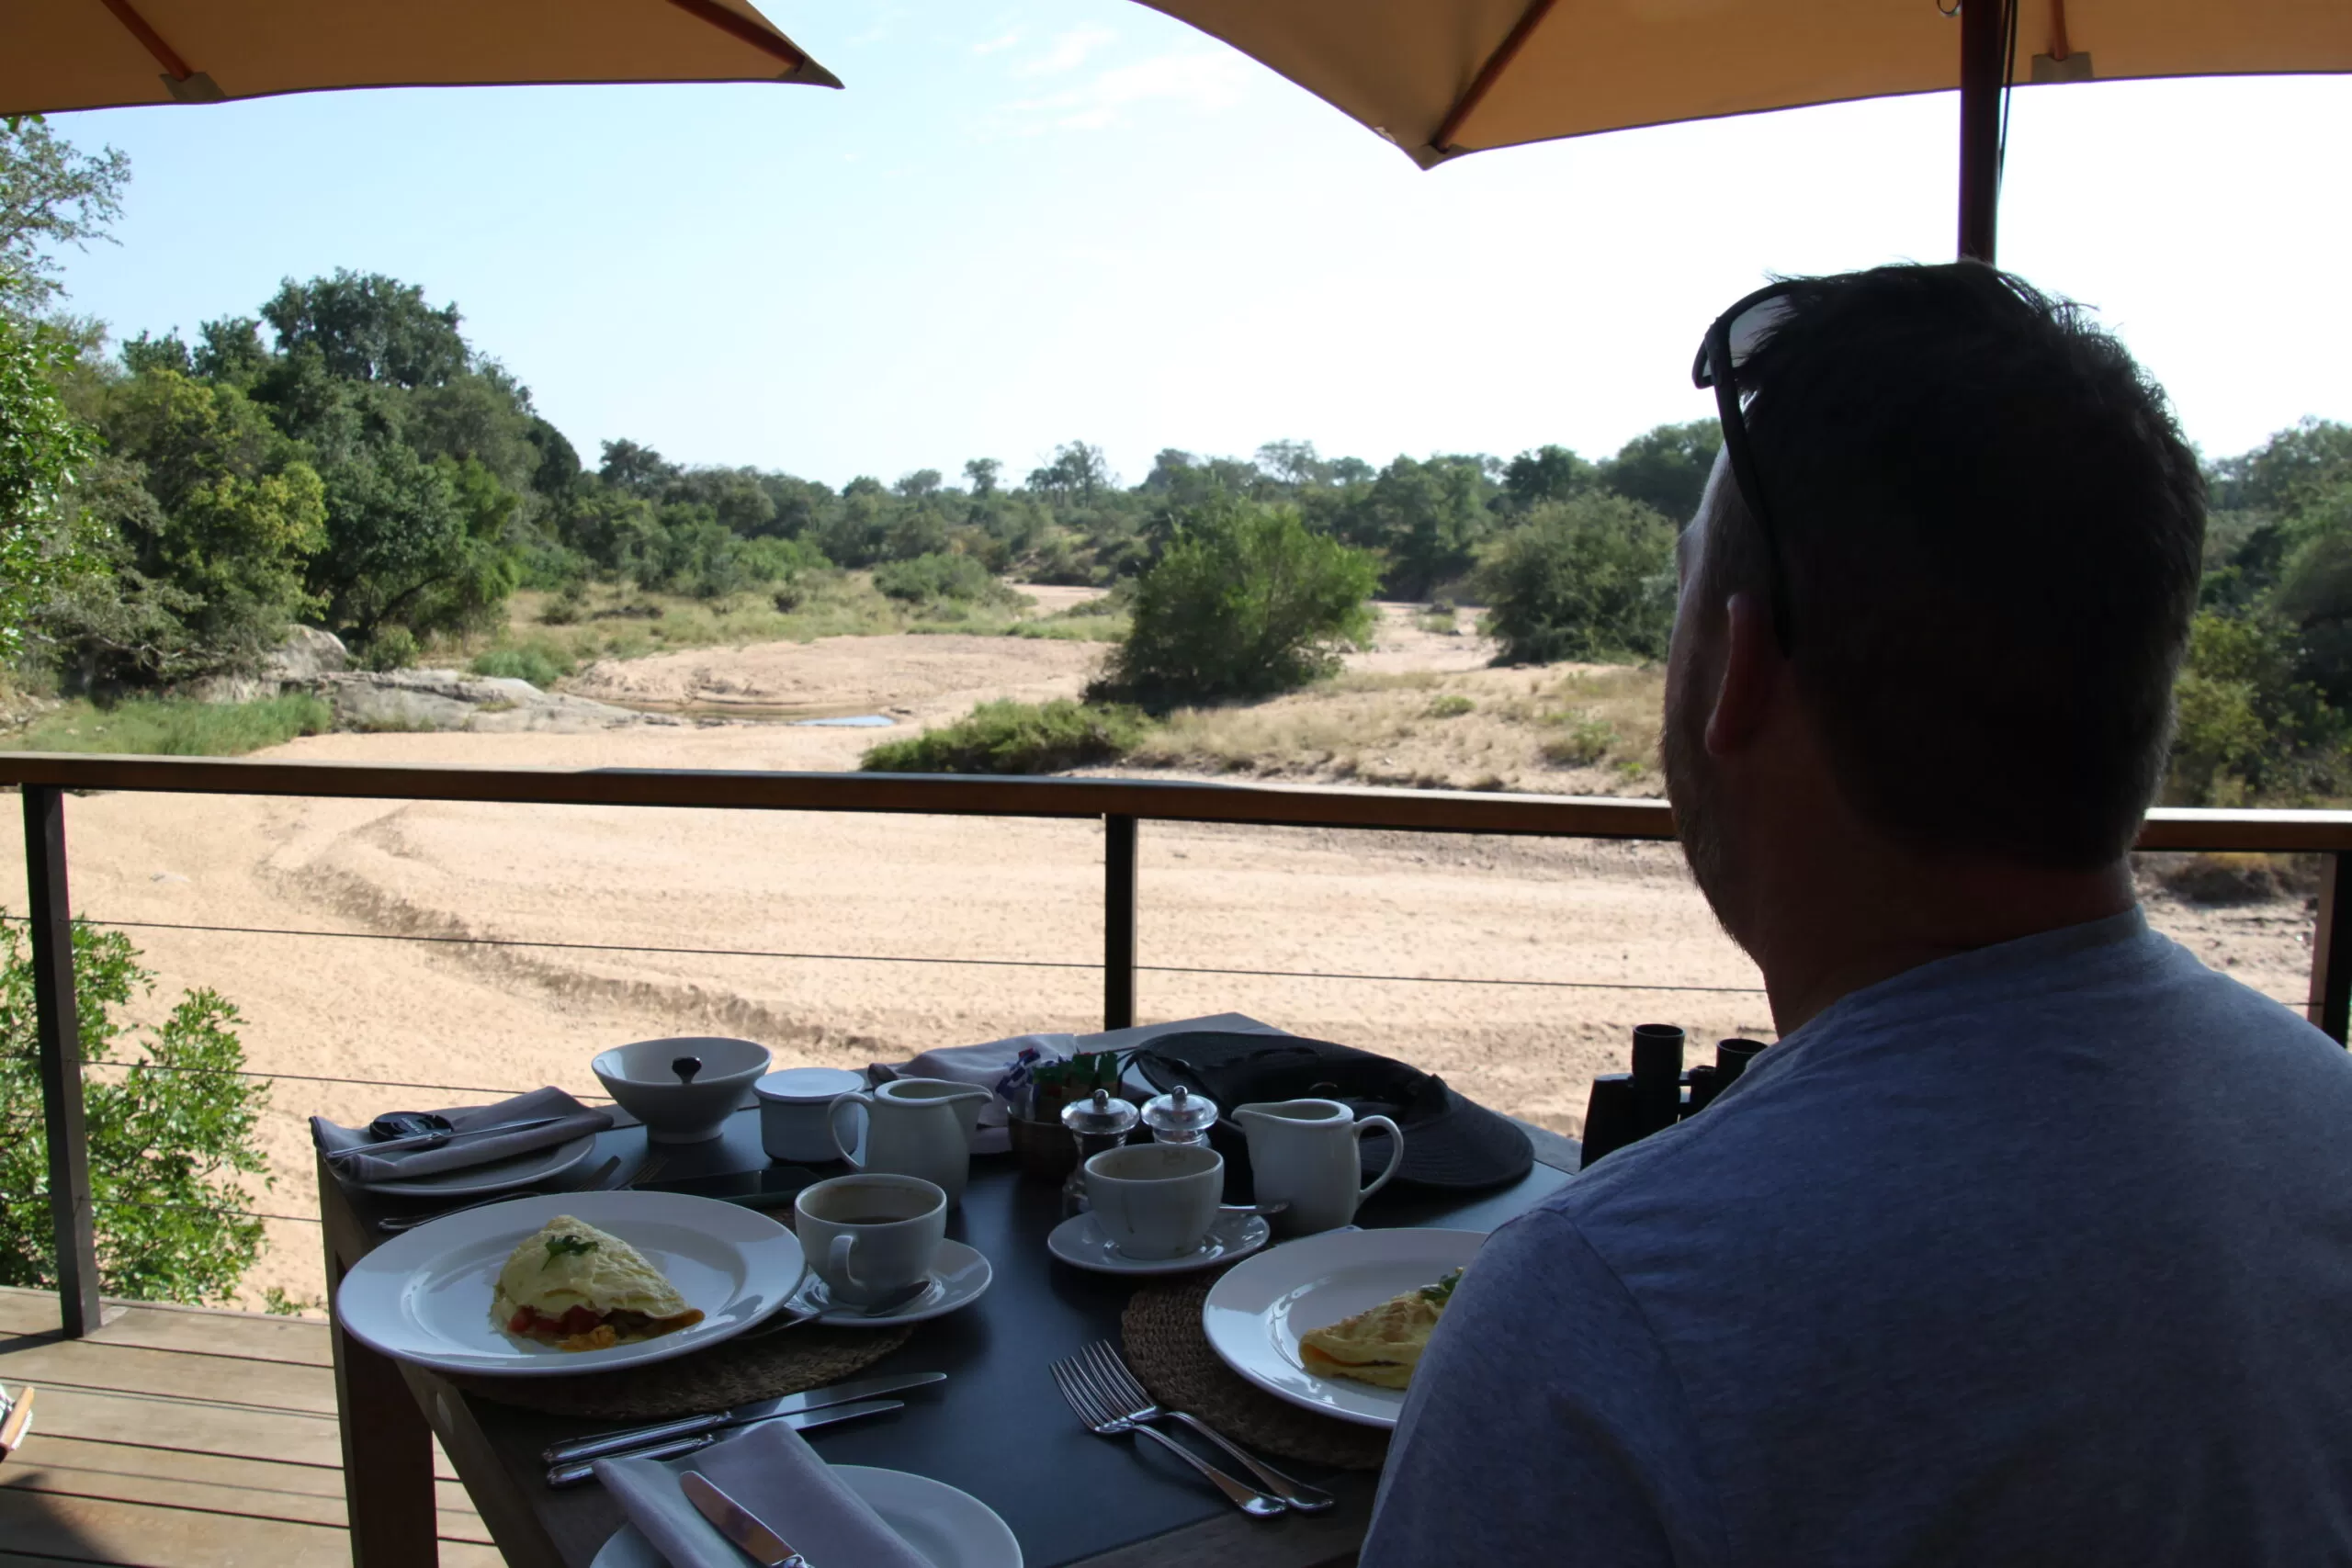 My only complaint, my omelet was cold. Reason: A leopard walked by right as our breakfast was served.